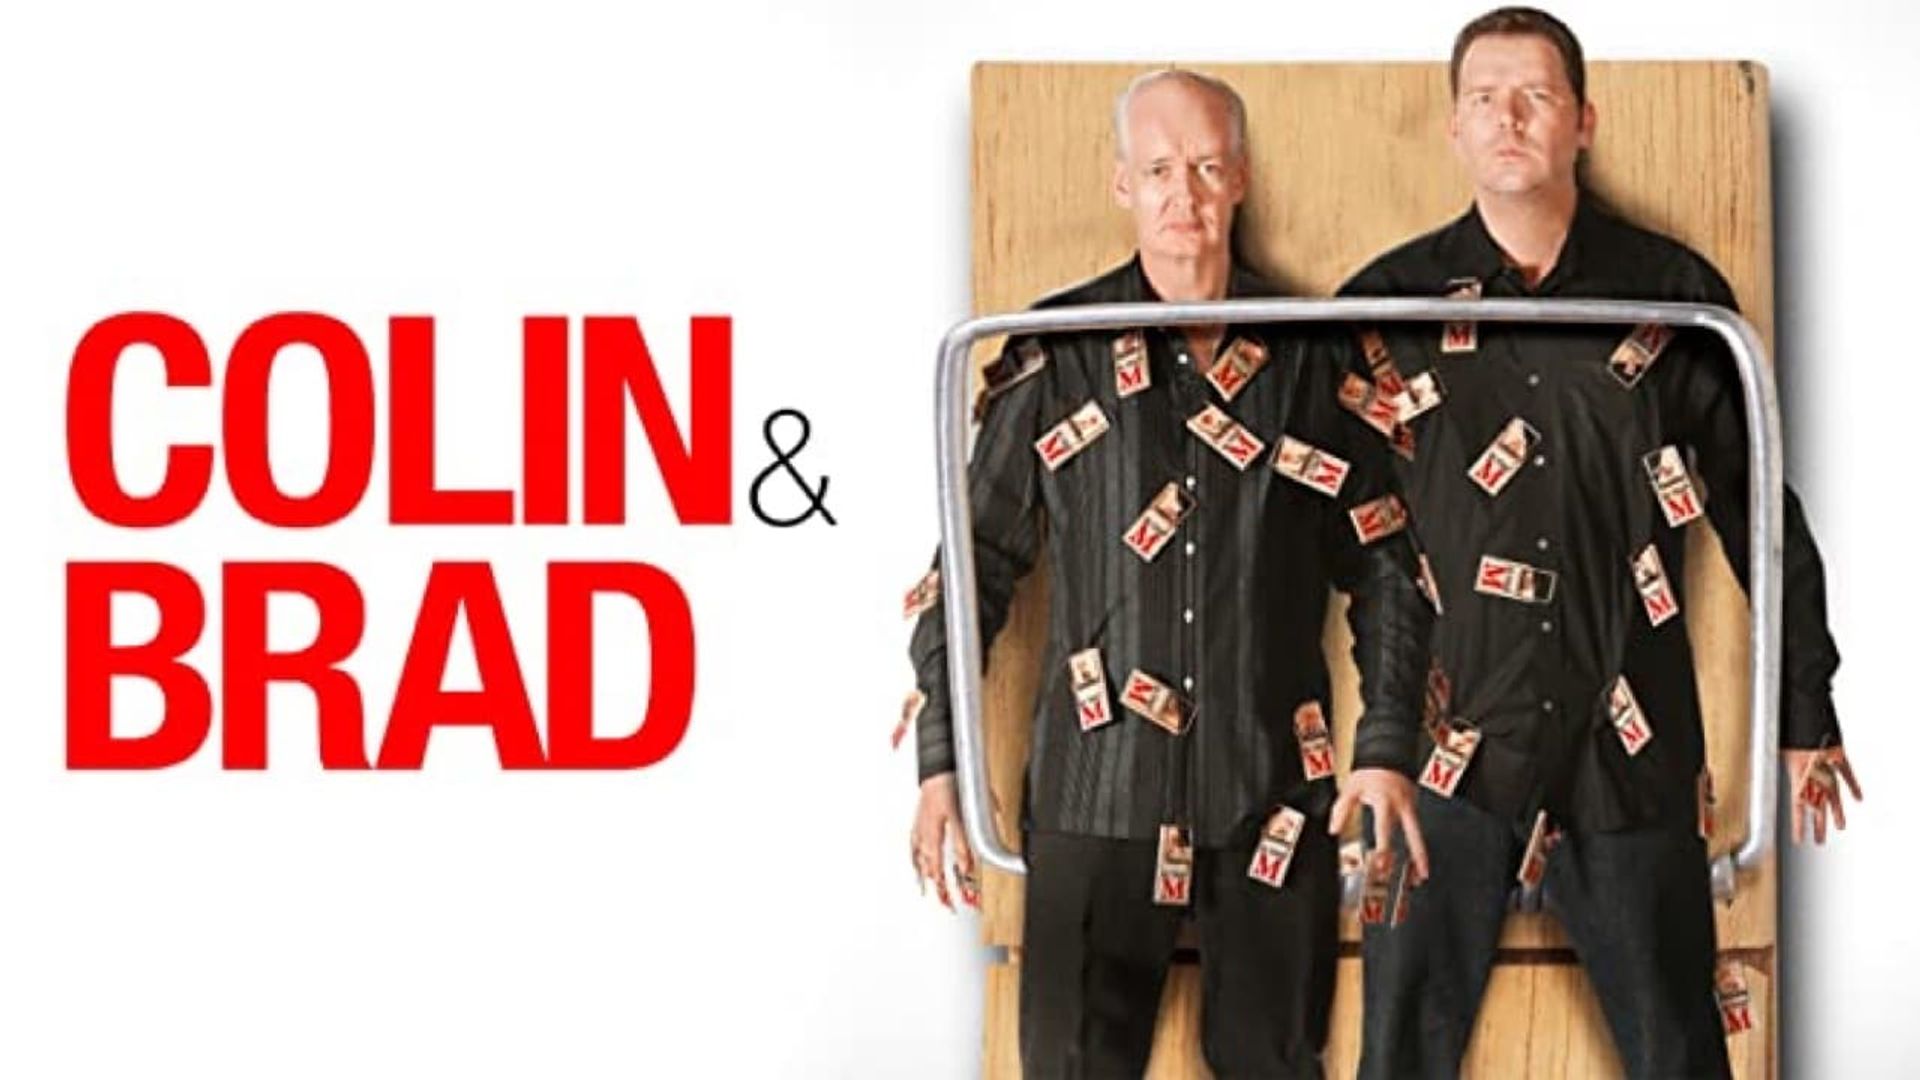 Colin & Brad: Two Man Group background